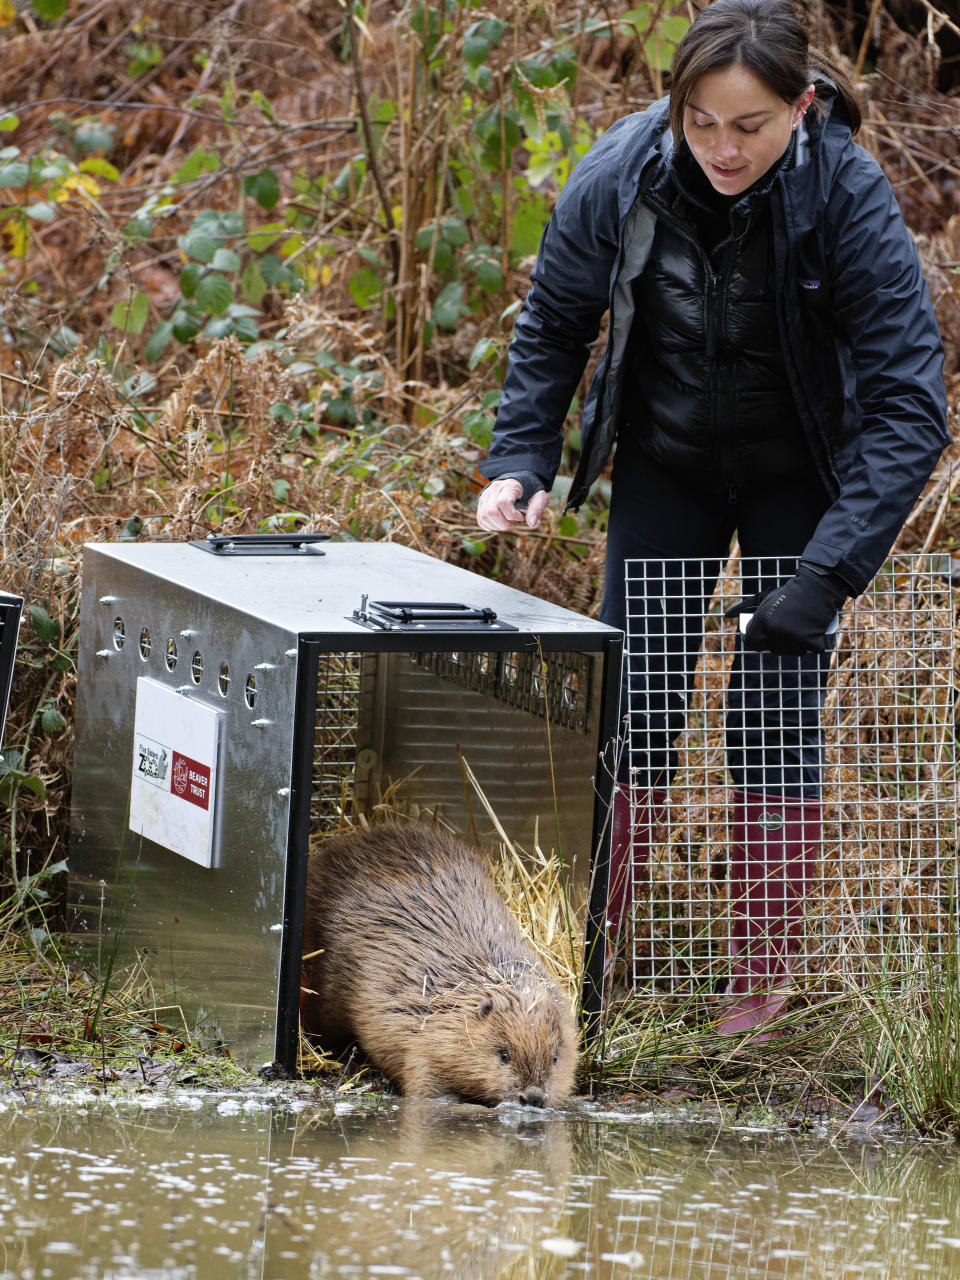 Mandy Lieu releasing one of the beavers from its cage at the water's edge in the enclosure (Nick Upton/Ewhurst/PA)